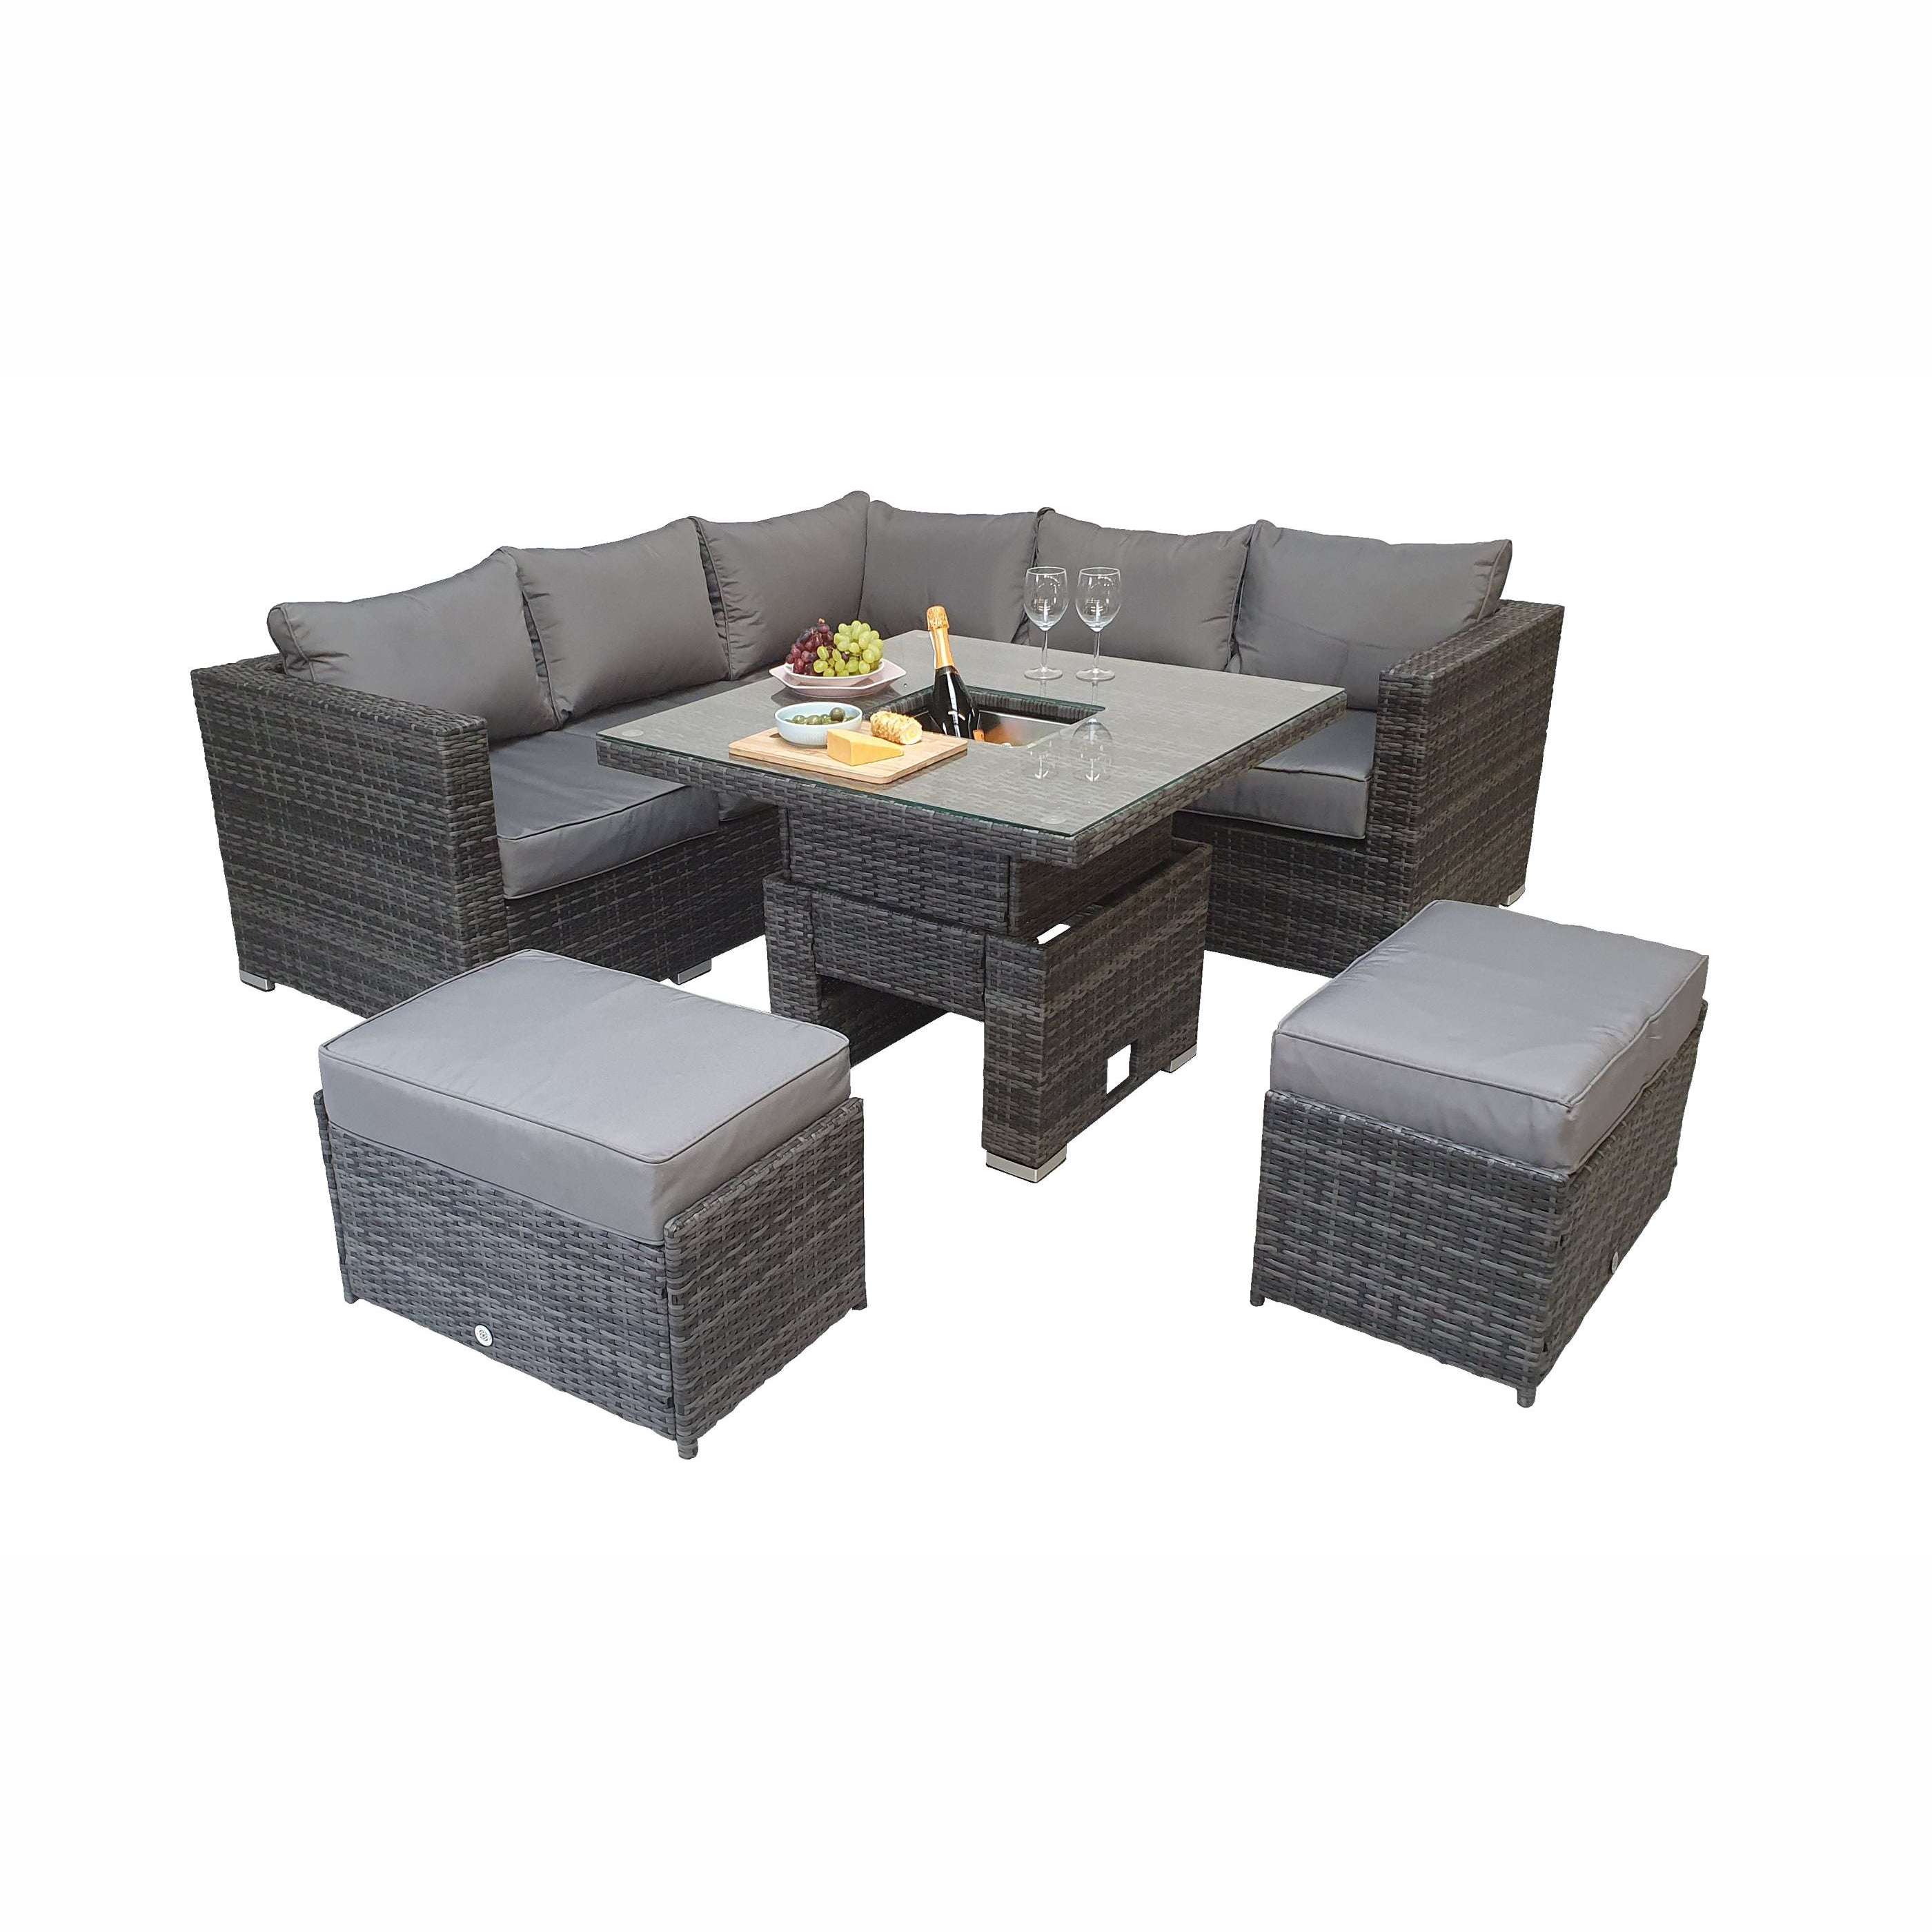 Exceptional Garden:Signature Weave Georgia Corner Dining Set with Ice Bucket and Lift Table - Grey